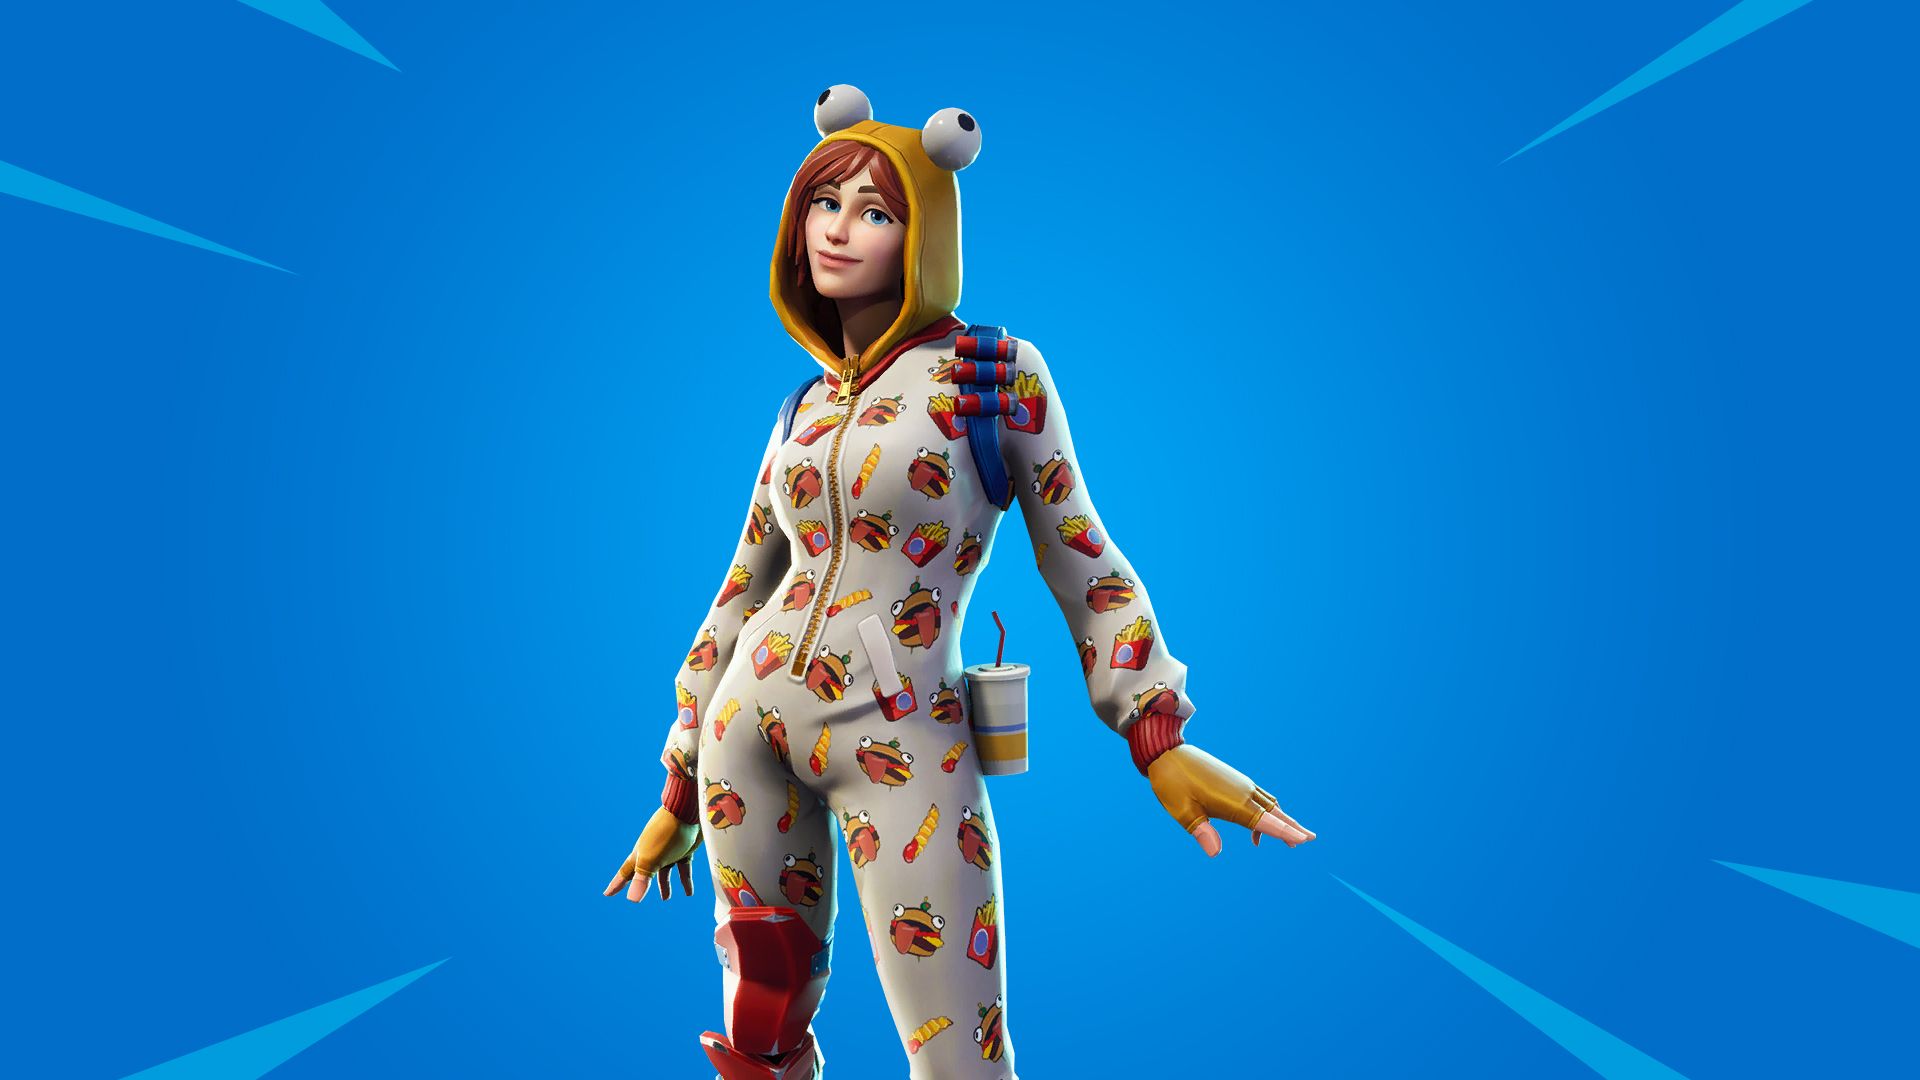 Can Epic Please Explain Why The Onesie Skin Was Removed From